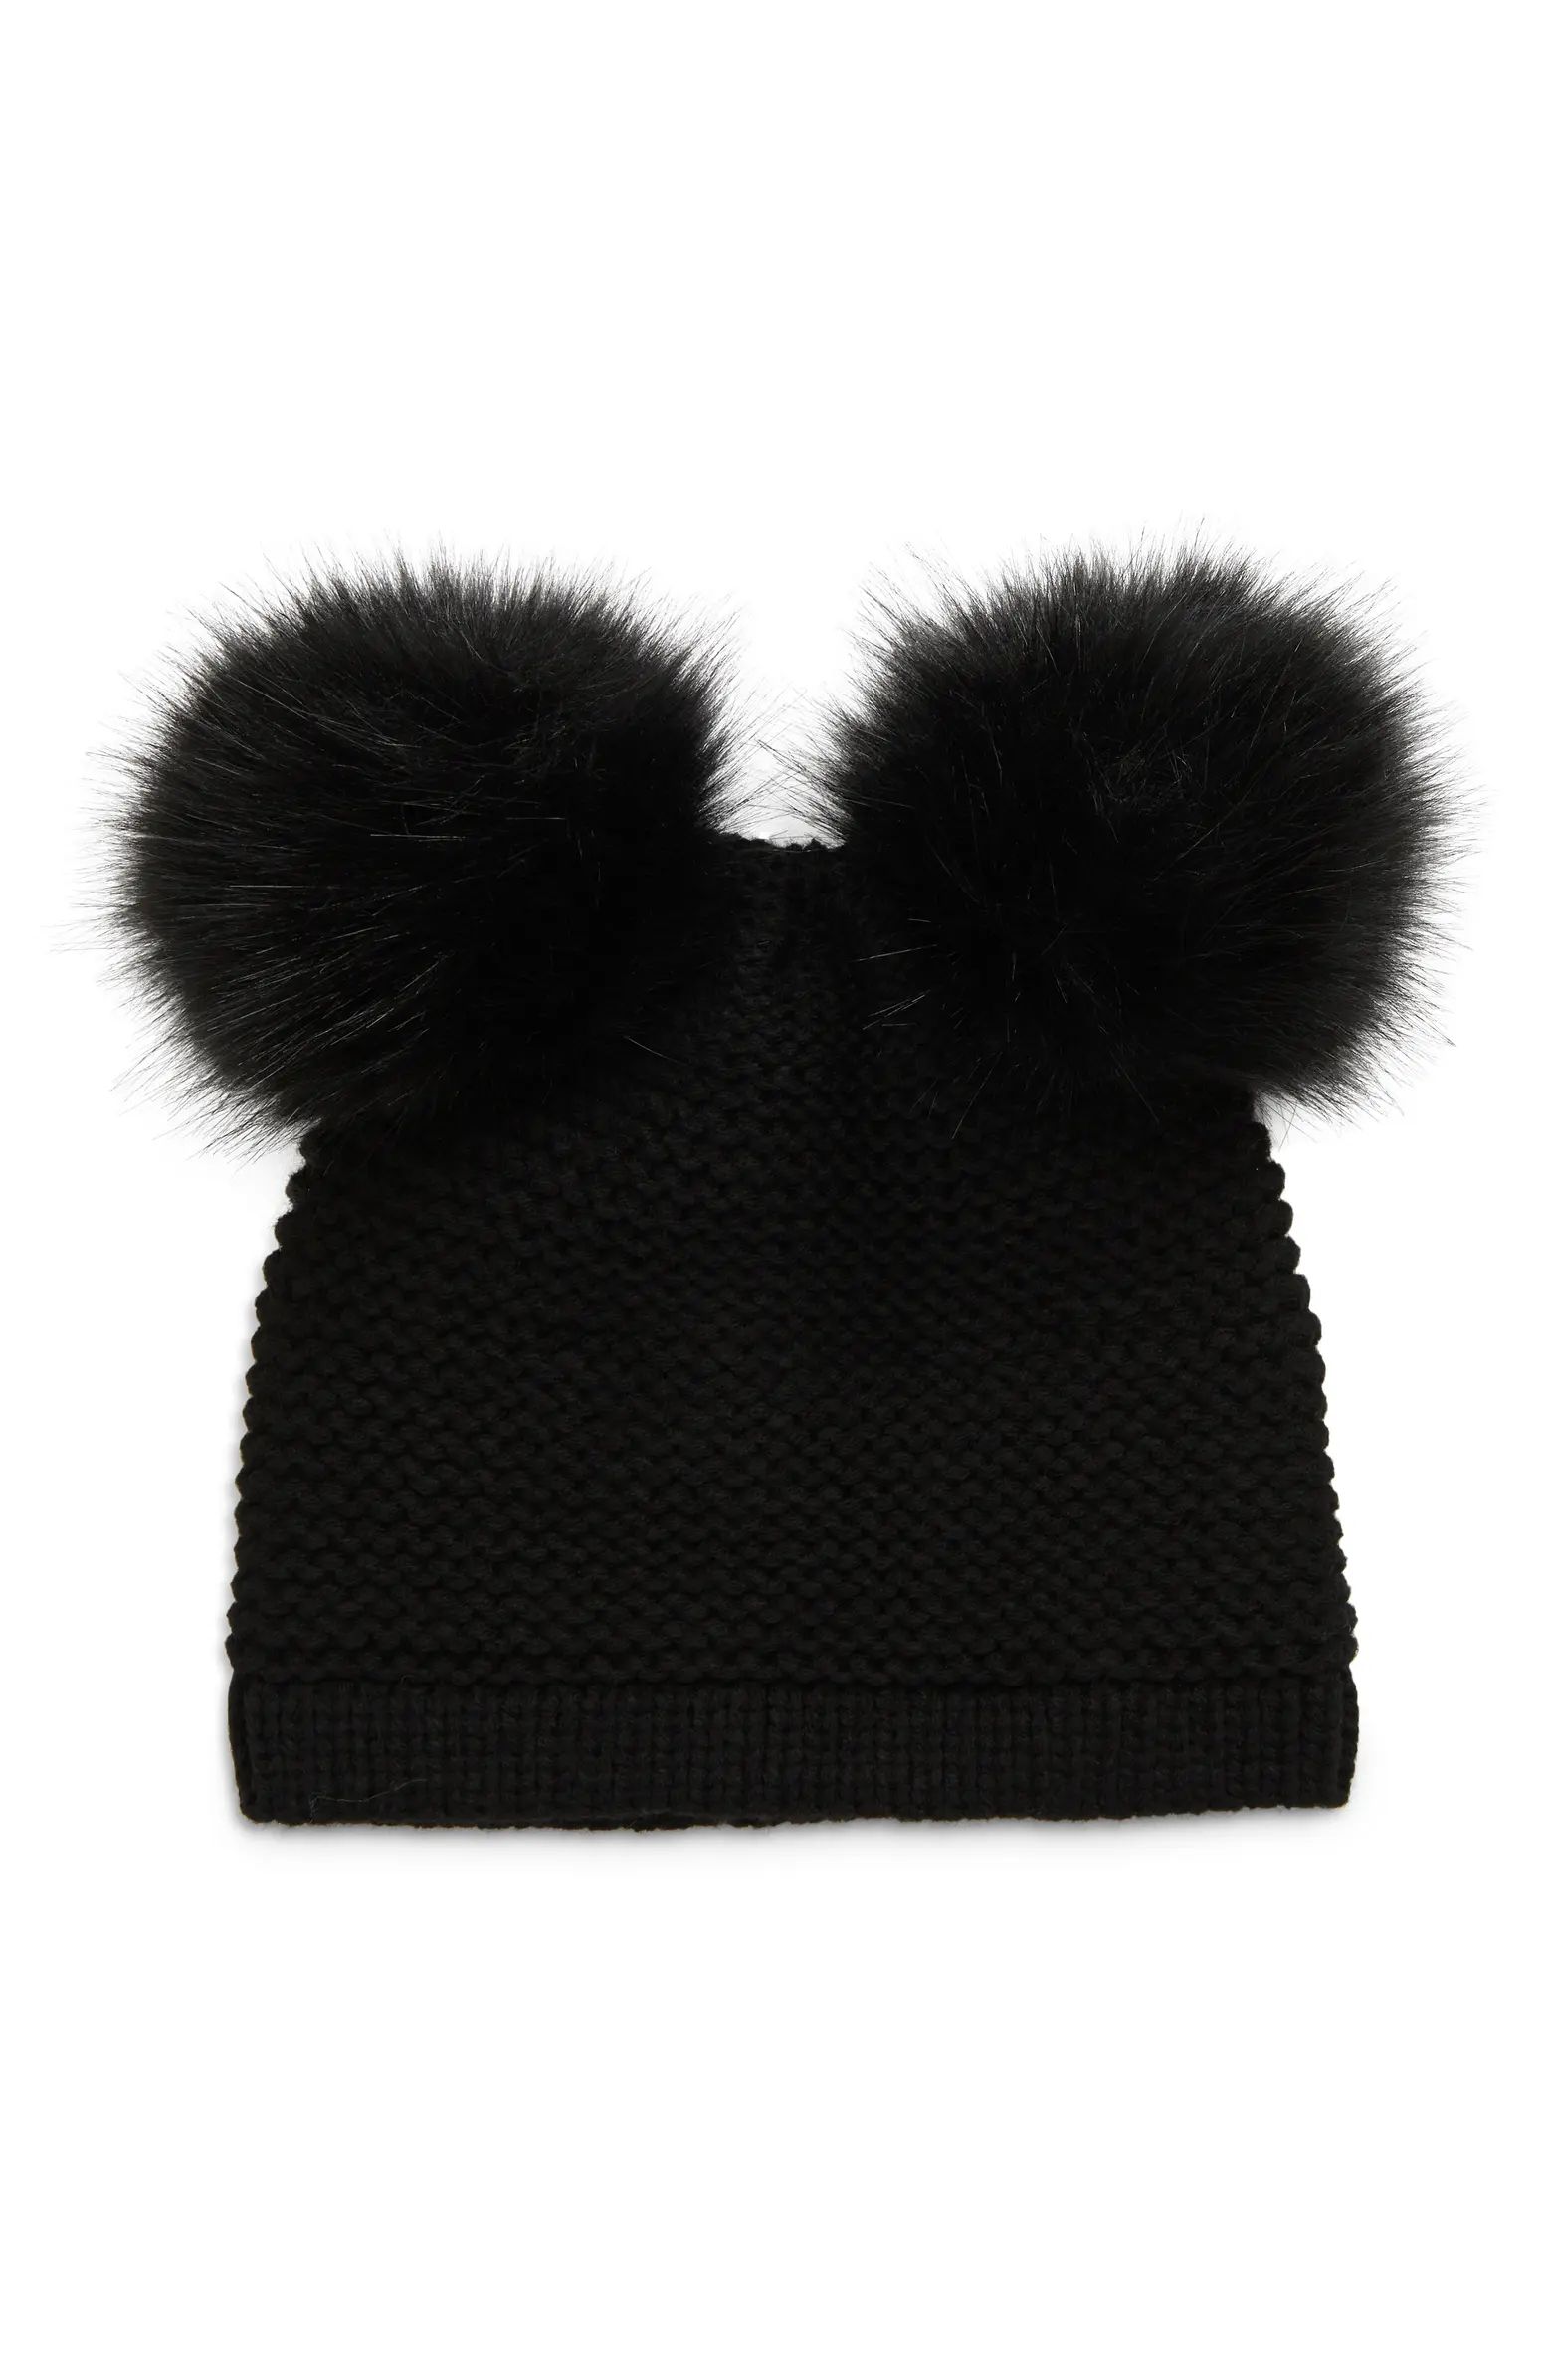 Kyi Kyi Chunky Wool Blend Beanie with Faux Fur Poms | Nordstrom | Nordstrom